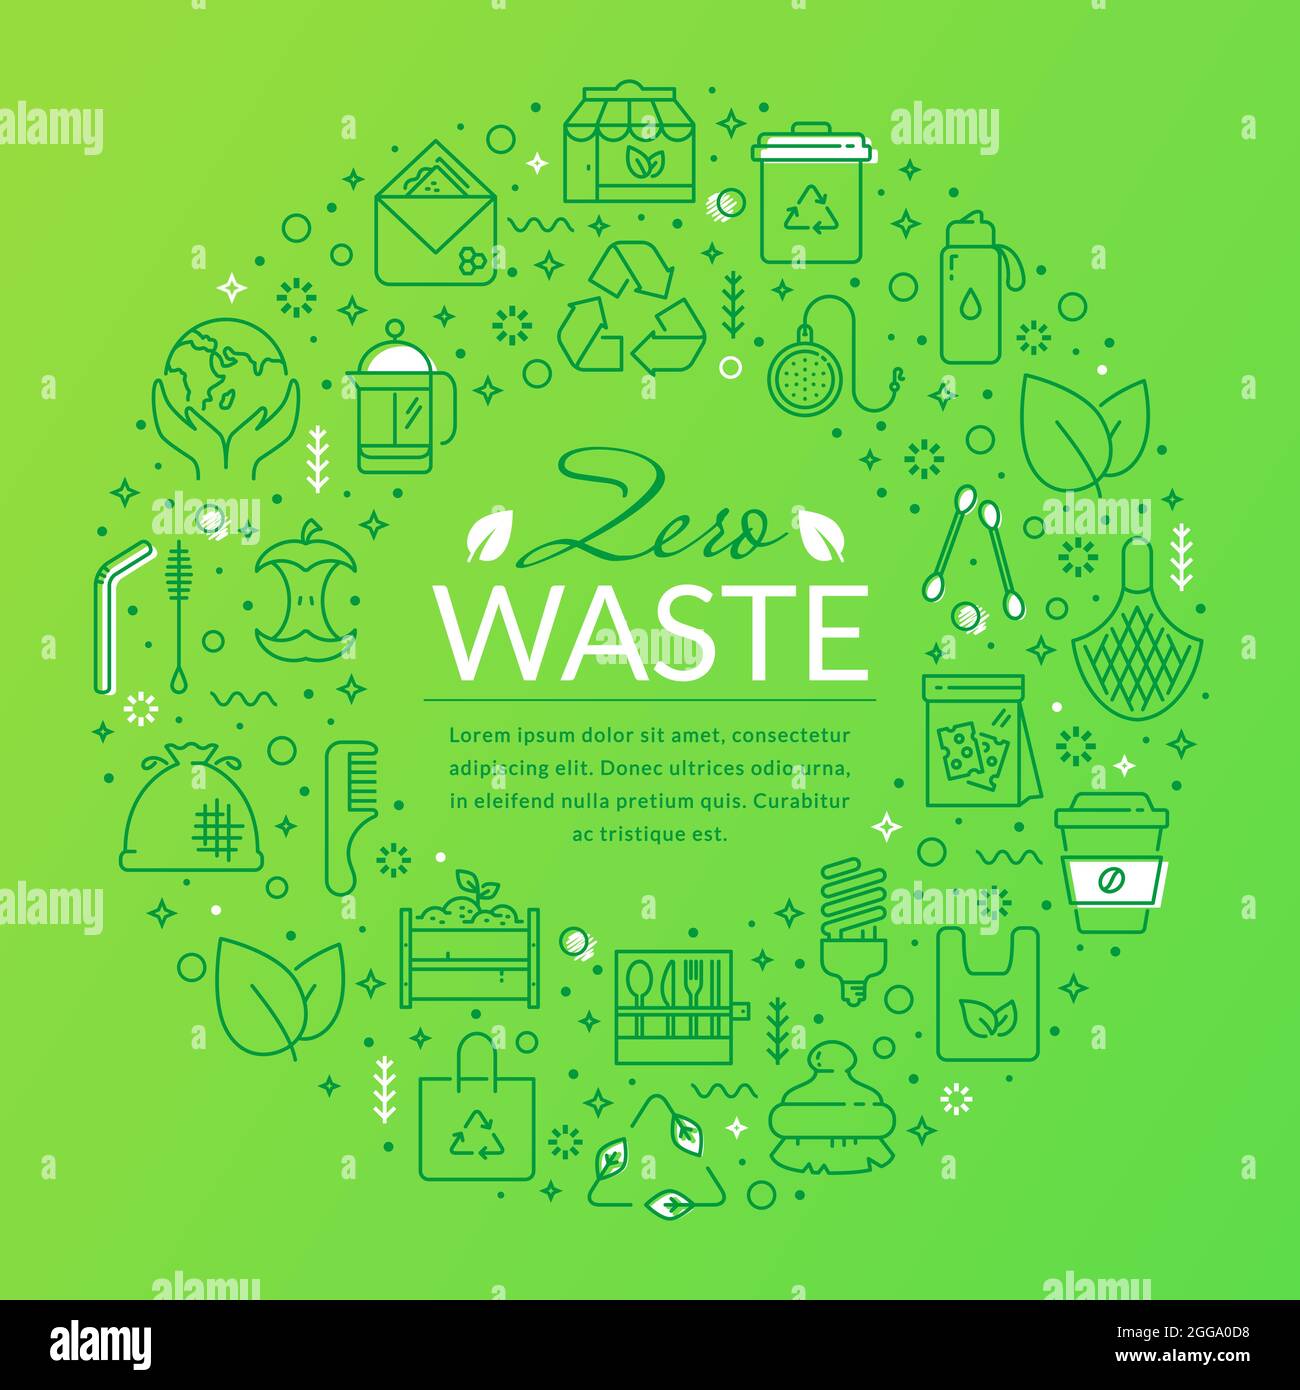 Zero waste banner with line icons and place for text. Template for recycling, reusable items, save the Planet and eco lifestyle concepts. Stock Vector